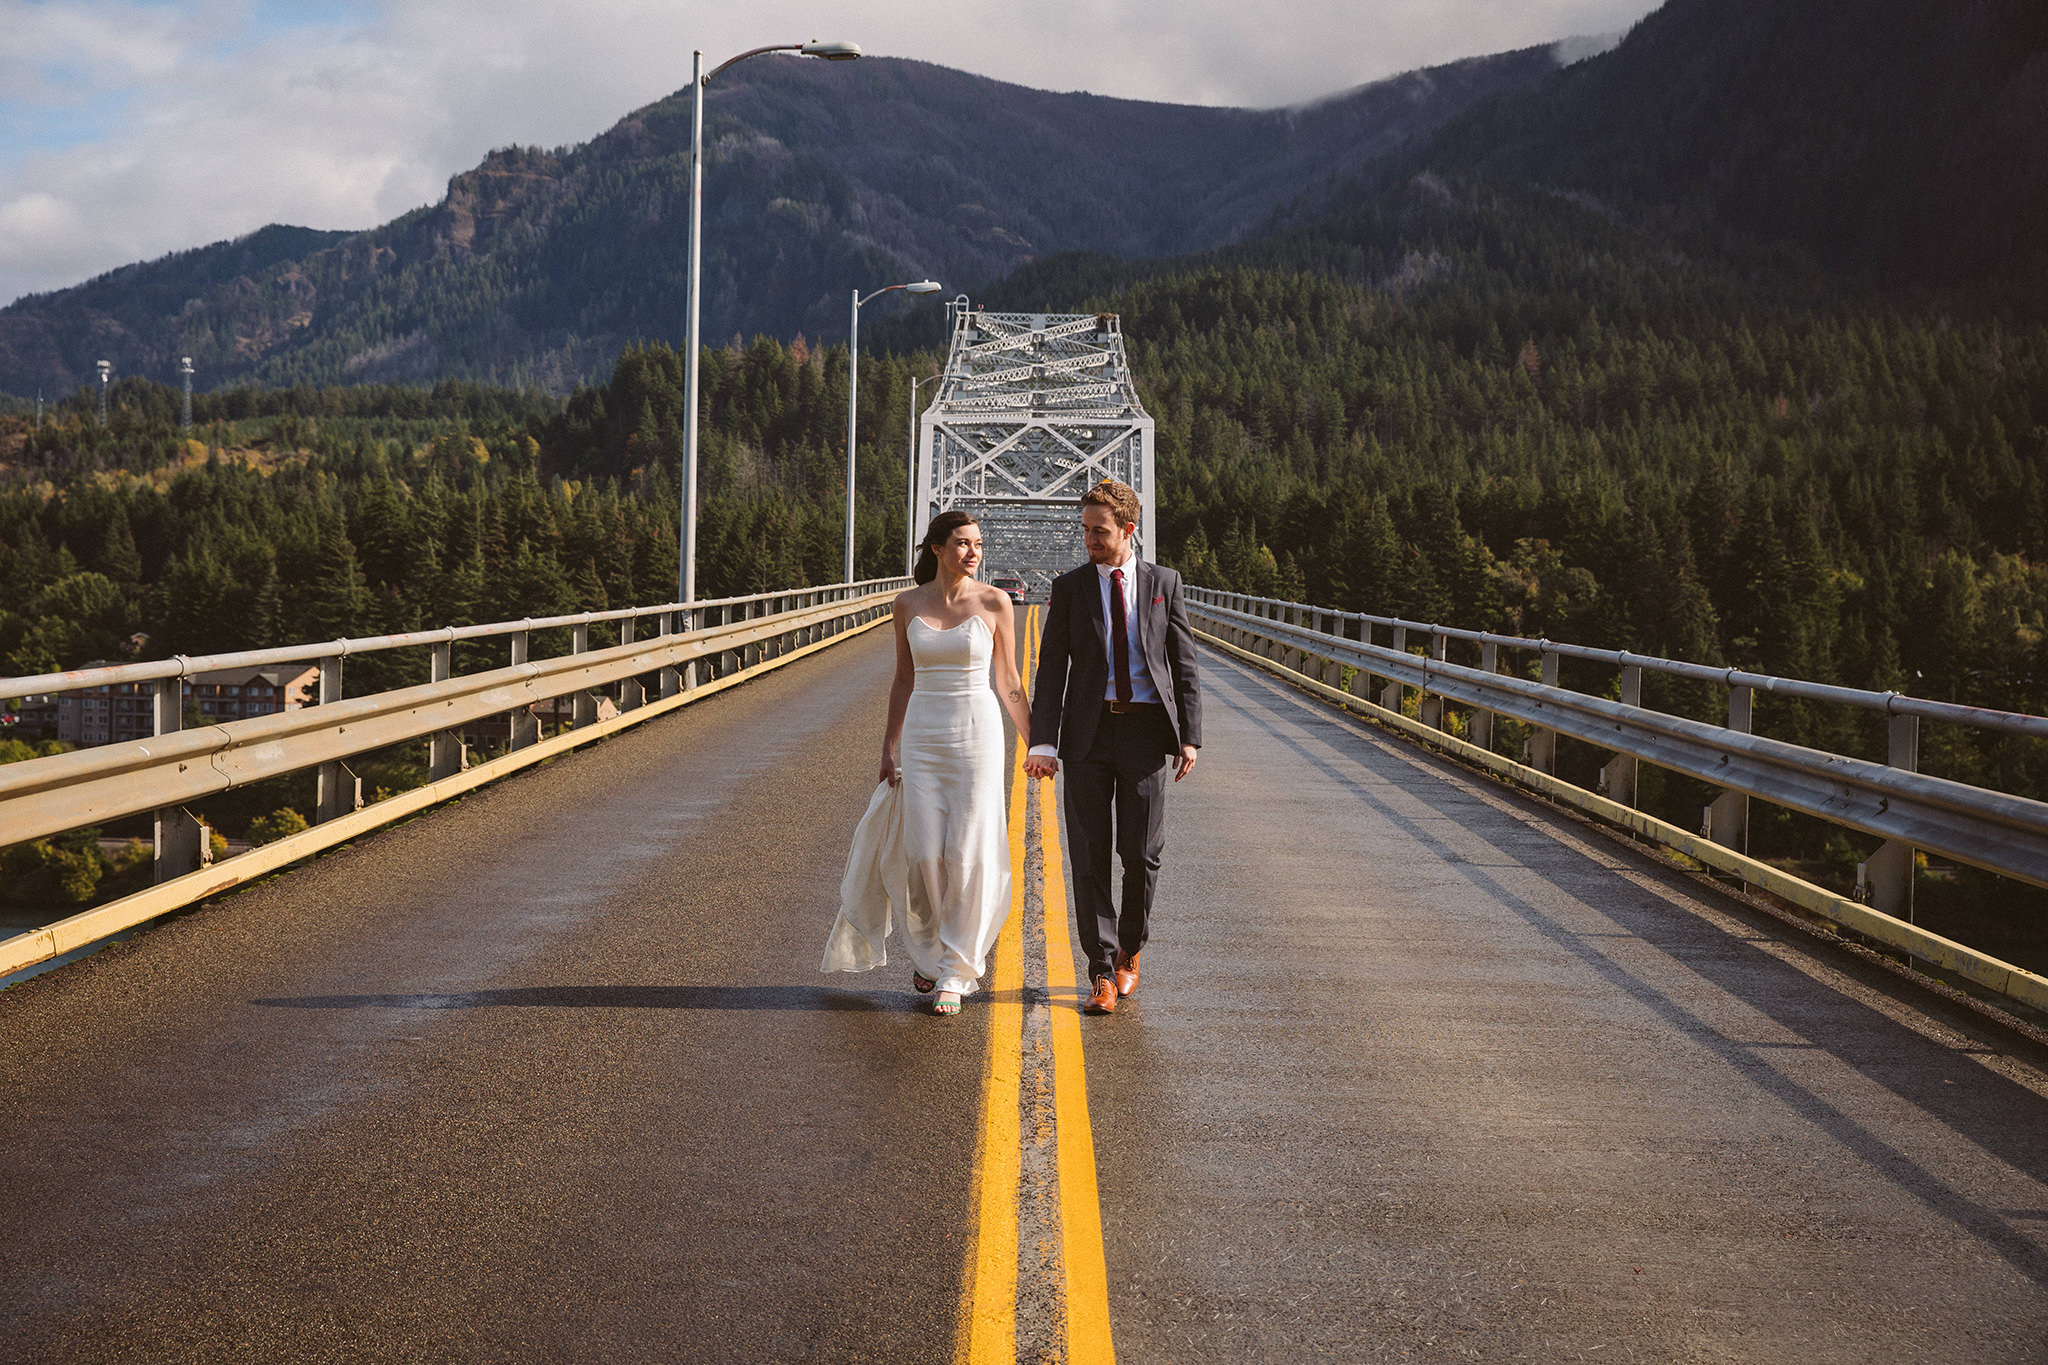 A bride and groom walking on the Bridge of the Gods over the Columbia River